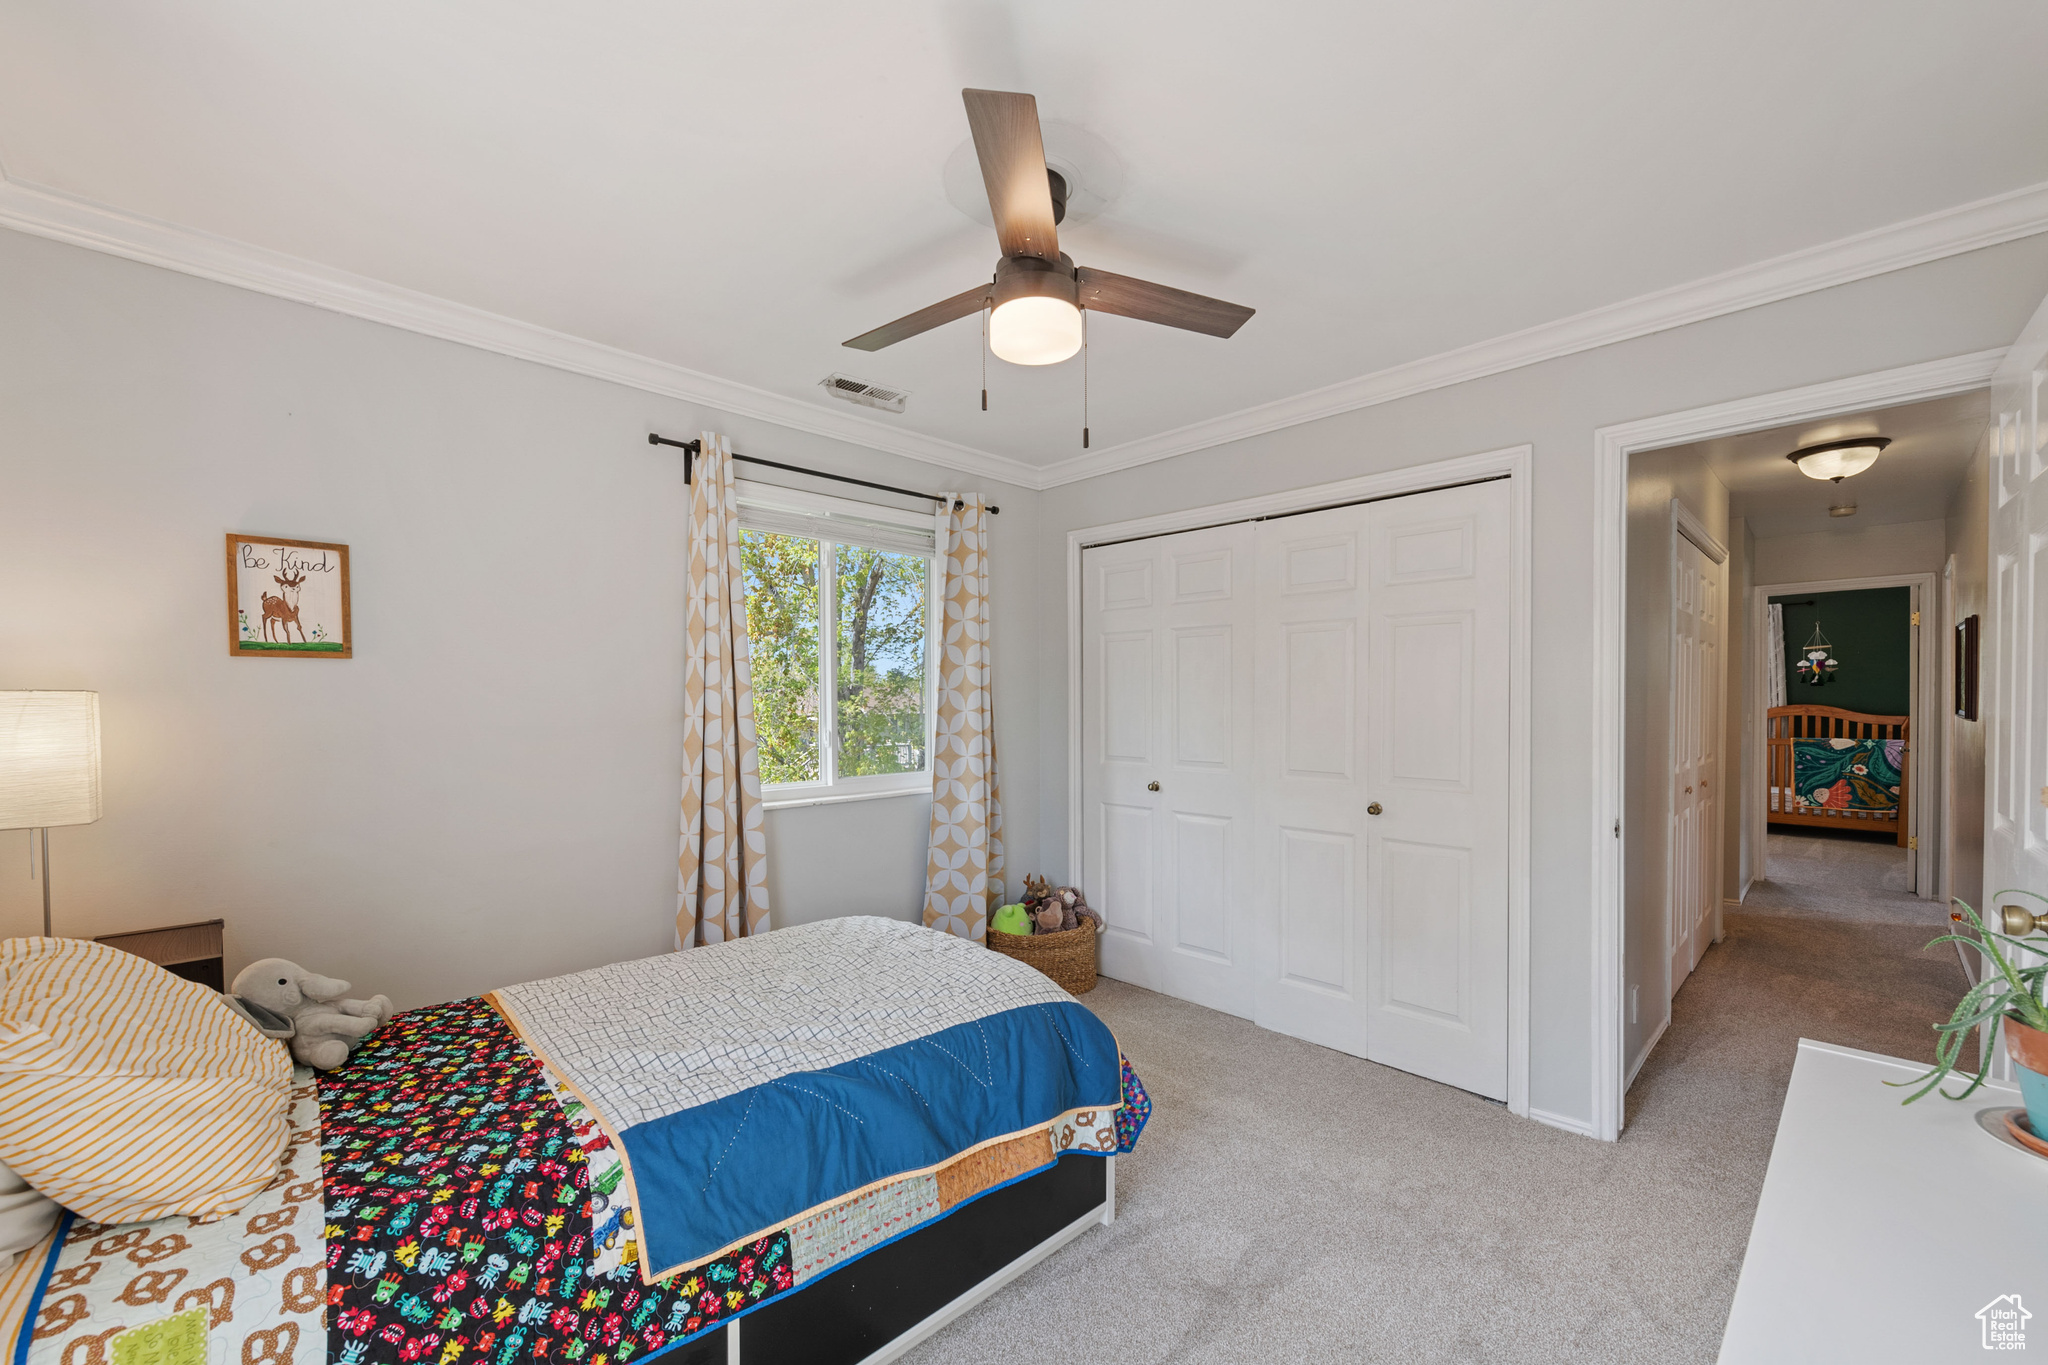 Bedroom with a closet, ornamental molding, ceiling fan, and carpet flooring